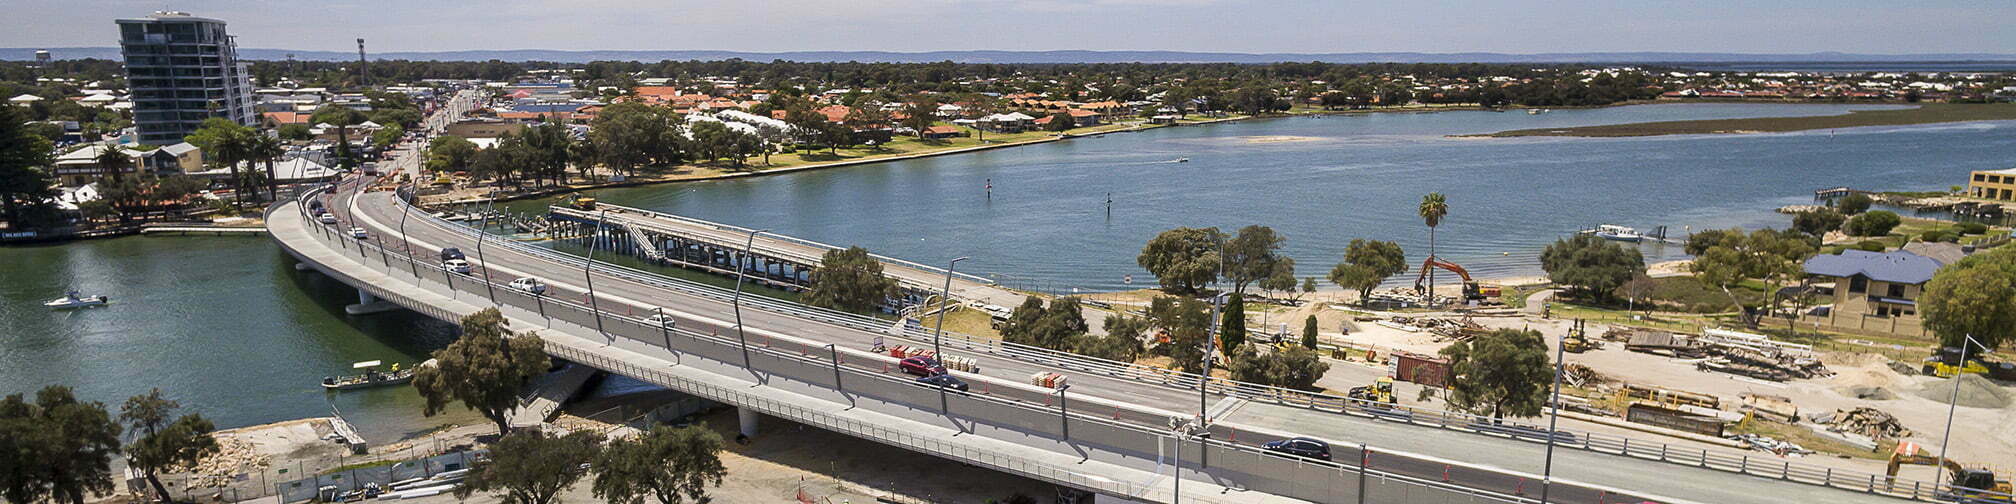 Image for MANDURAH BRIDGE OPENS JUST IN TIME FOR HOLIDAY SEASON